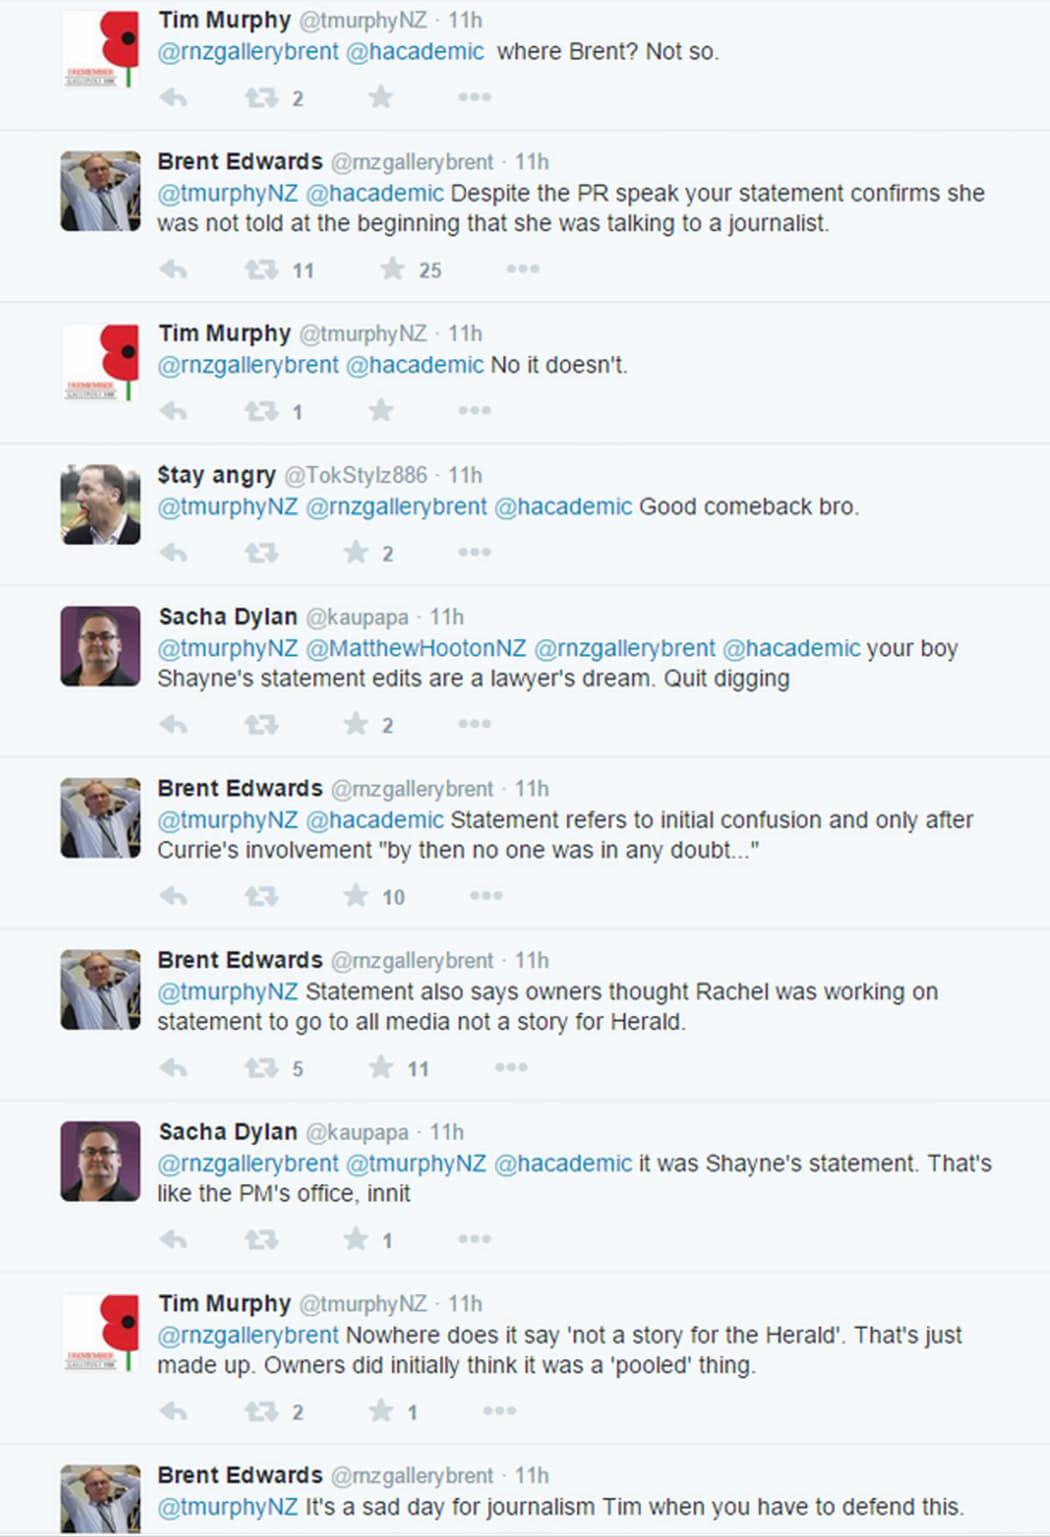 The Twitter exchange between Brent Edwards and Tim Murphy.